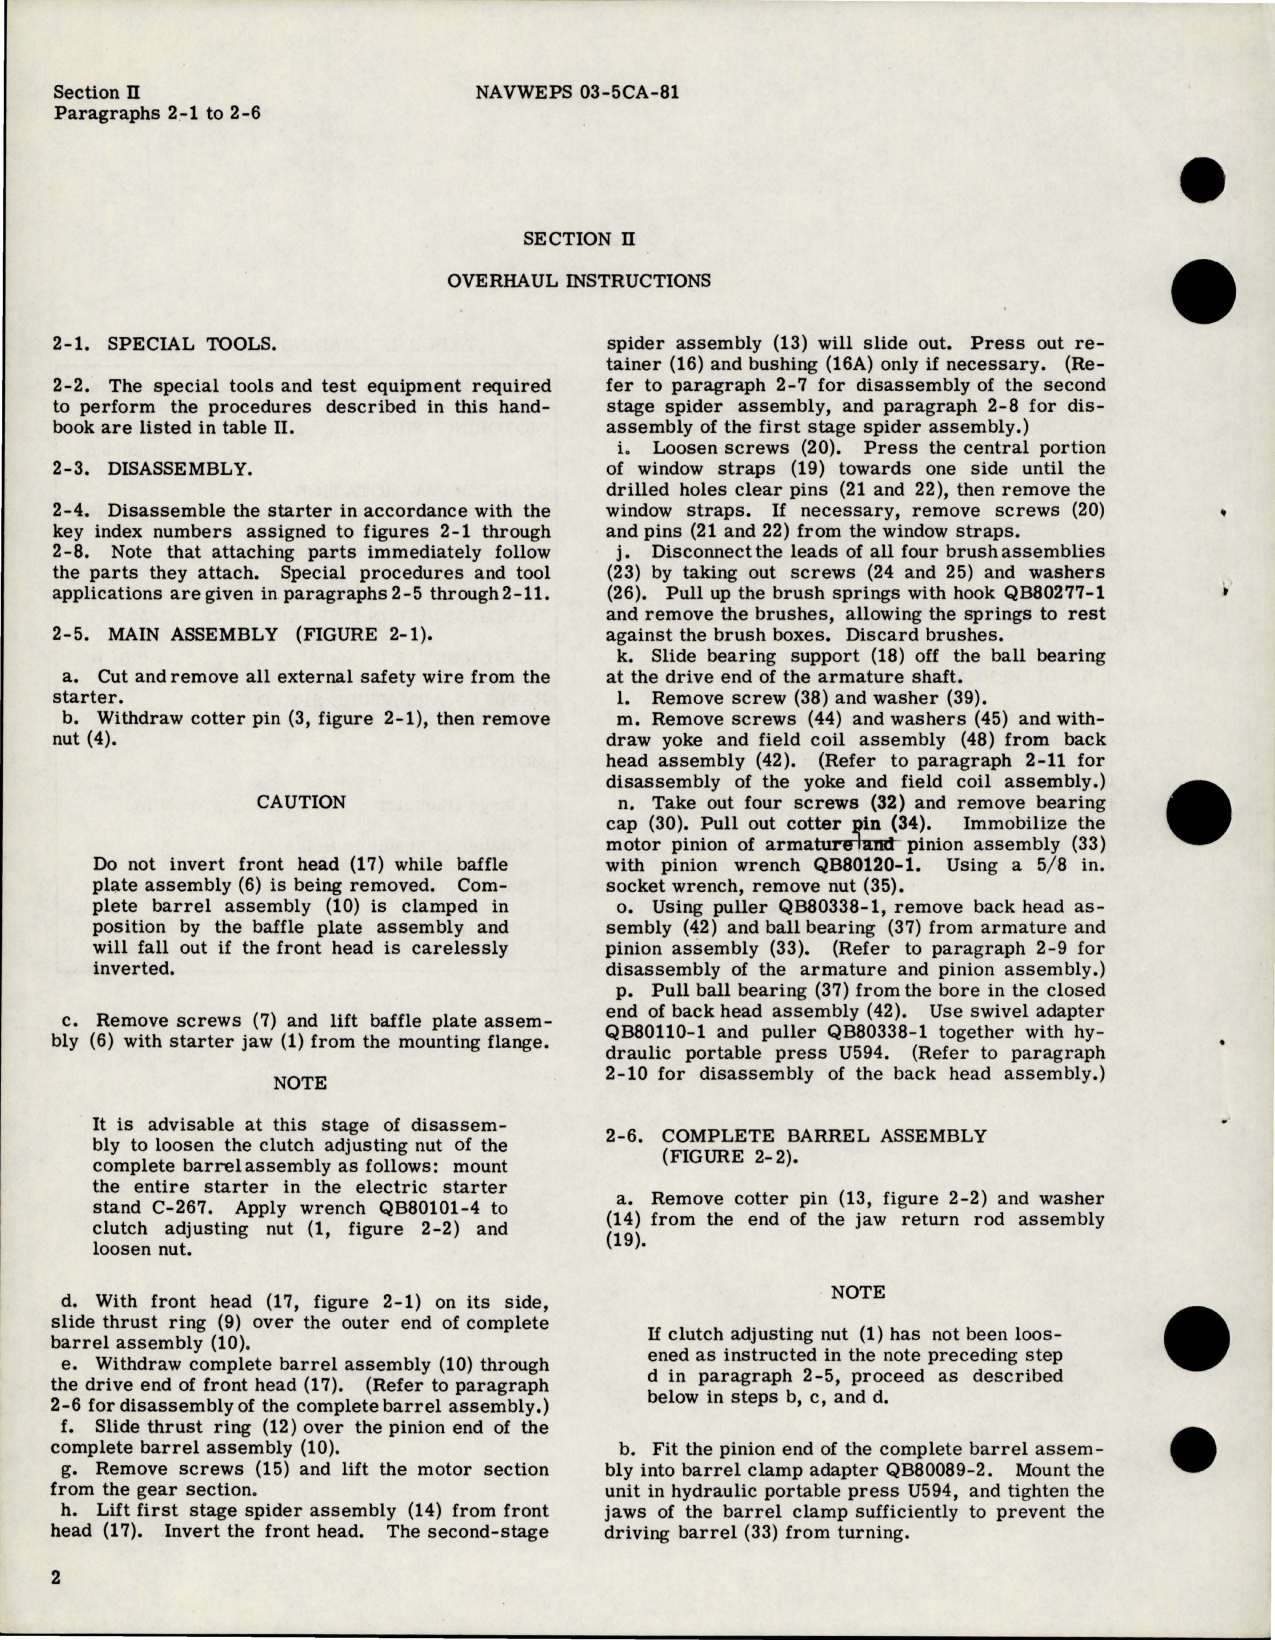 Sample page 8 from AirCorps Library document: Overhaul Instructions for Direct Cranking Electric Starter - Part 1416 and 36E00 Series 